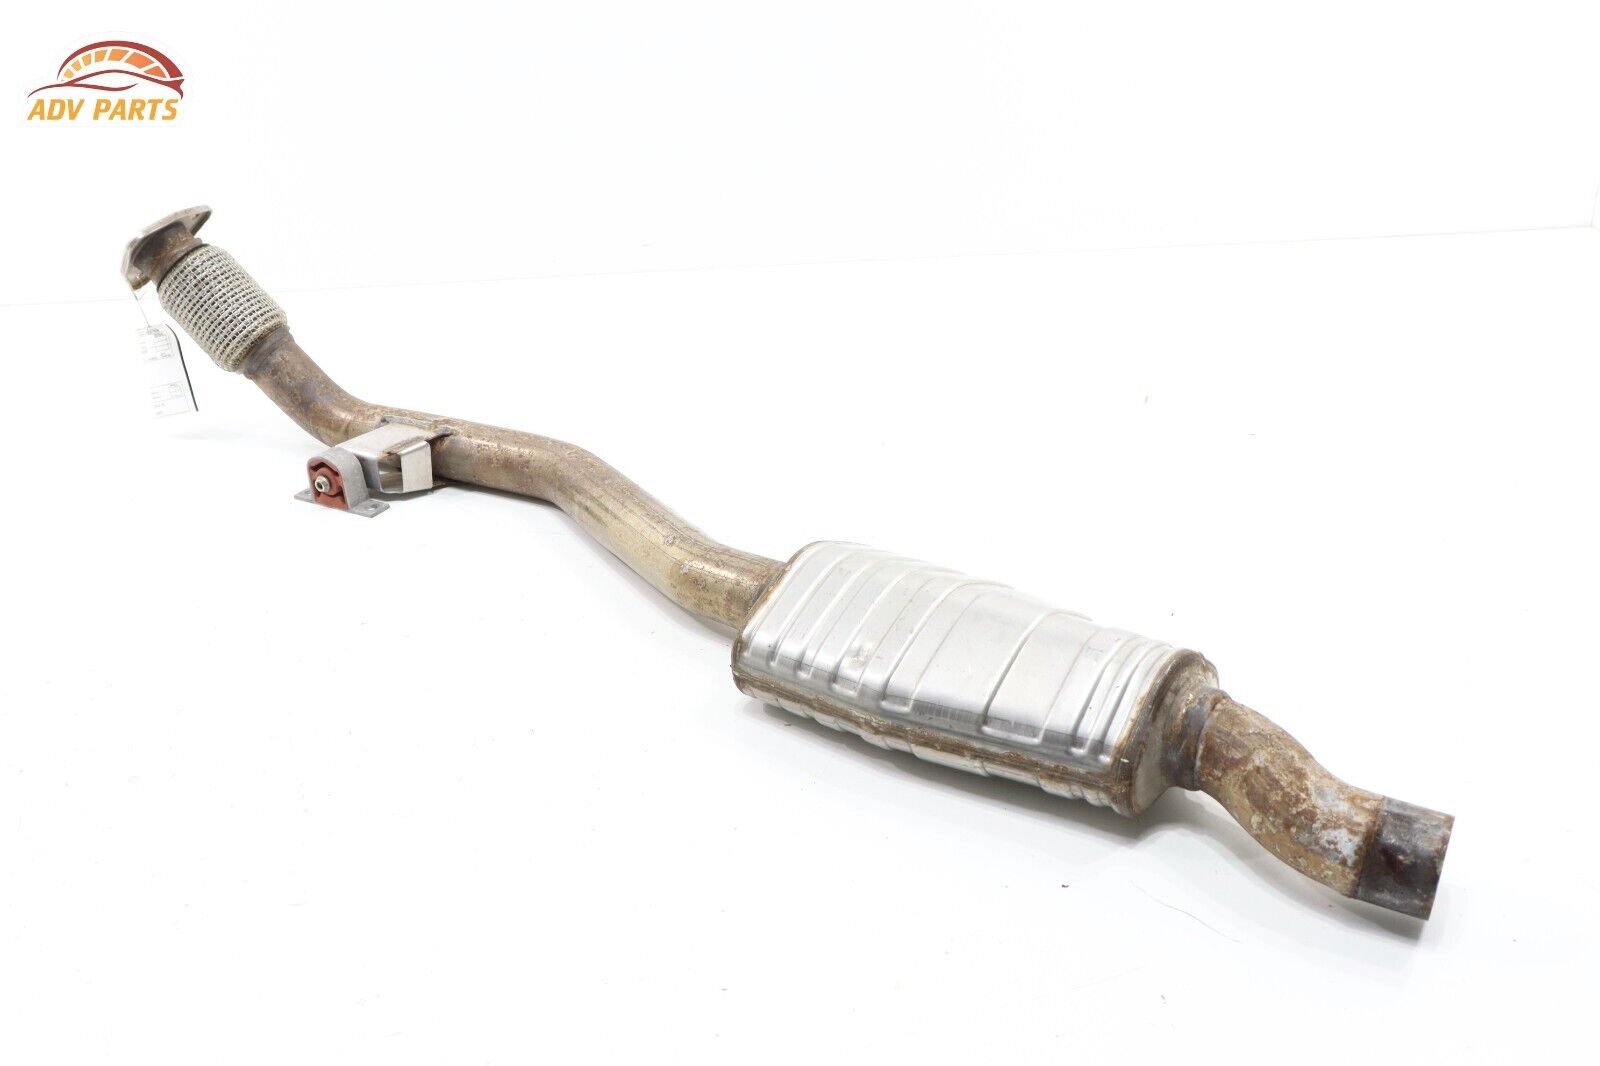 AUDI Q7 3.0L ENGINE FRONT RIGHT SIDE EXHAUST RESONATOR PIPE OEM 2017 - 2019 💎